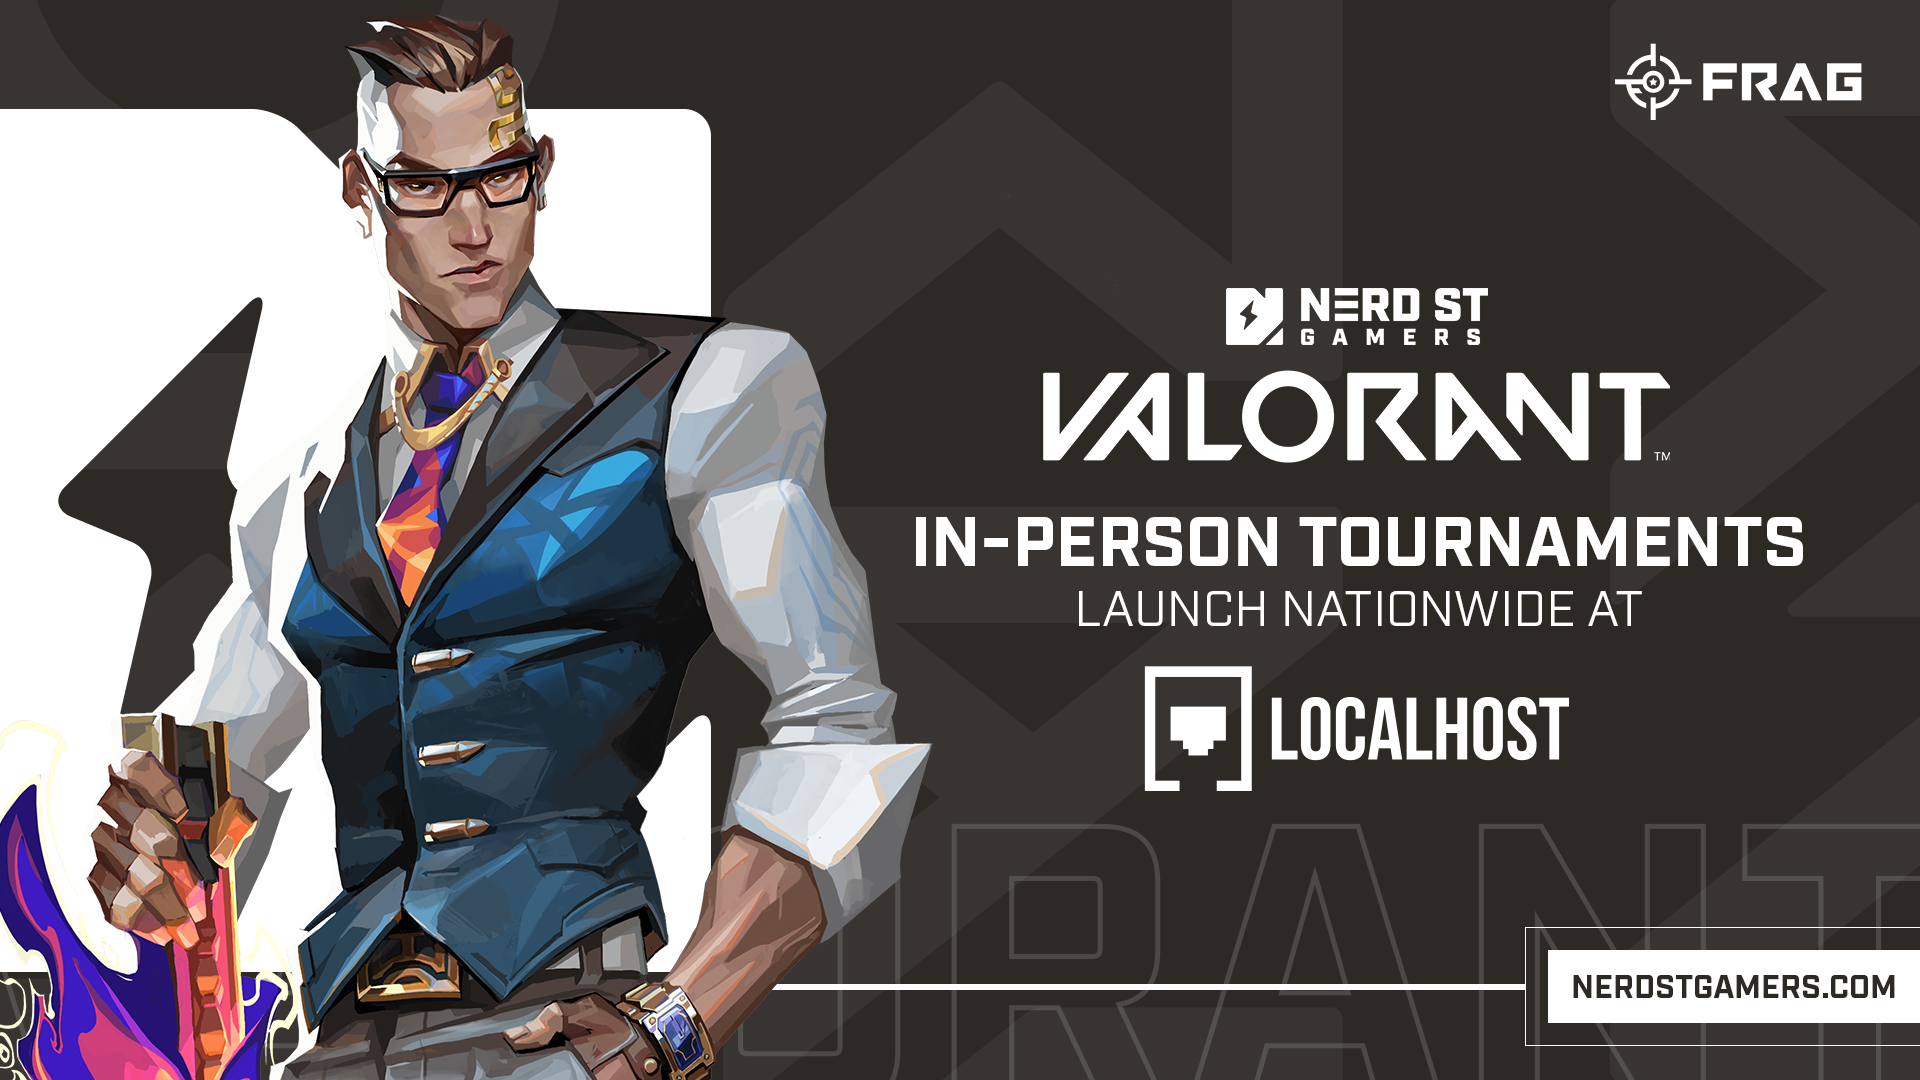 Nerd Street Launches First VALORANT In-Person Tournaments Nationwide at Localhost Gaming and Esports Centers Nerd Street